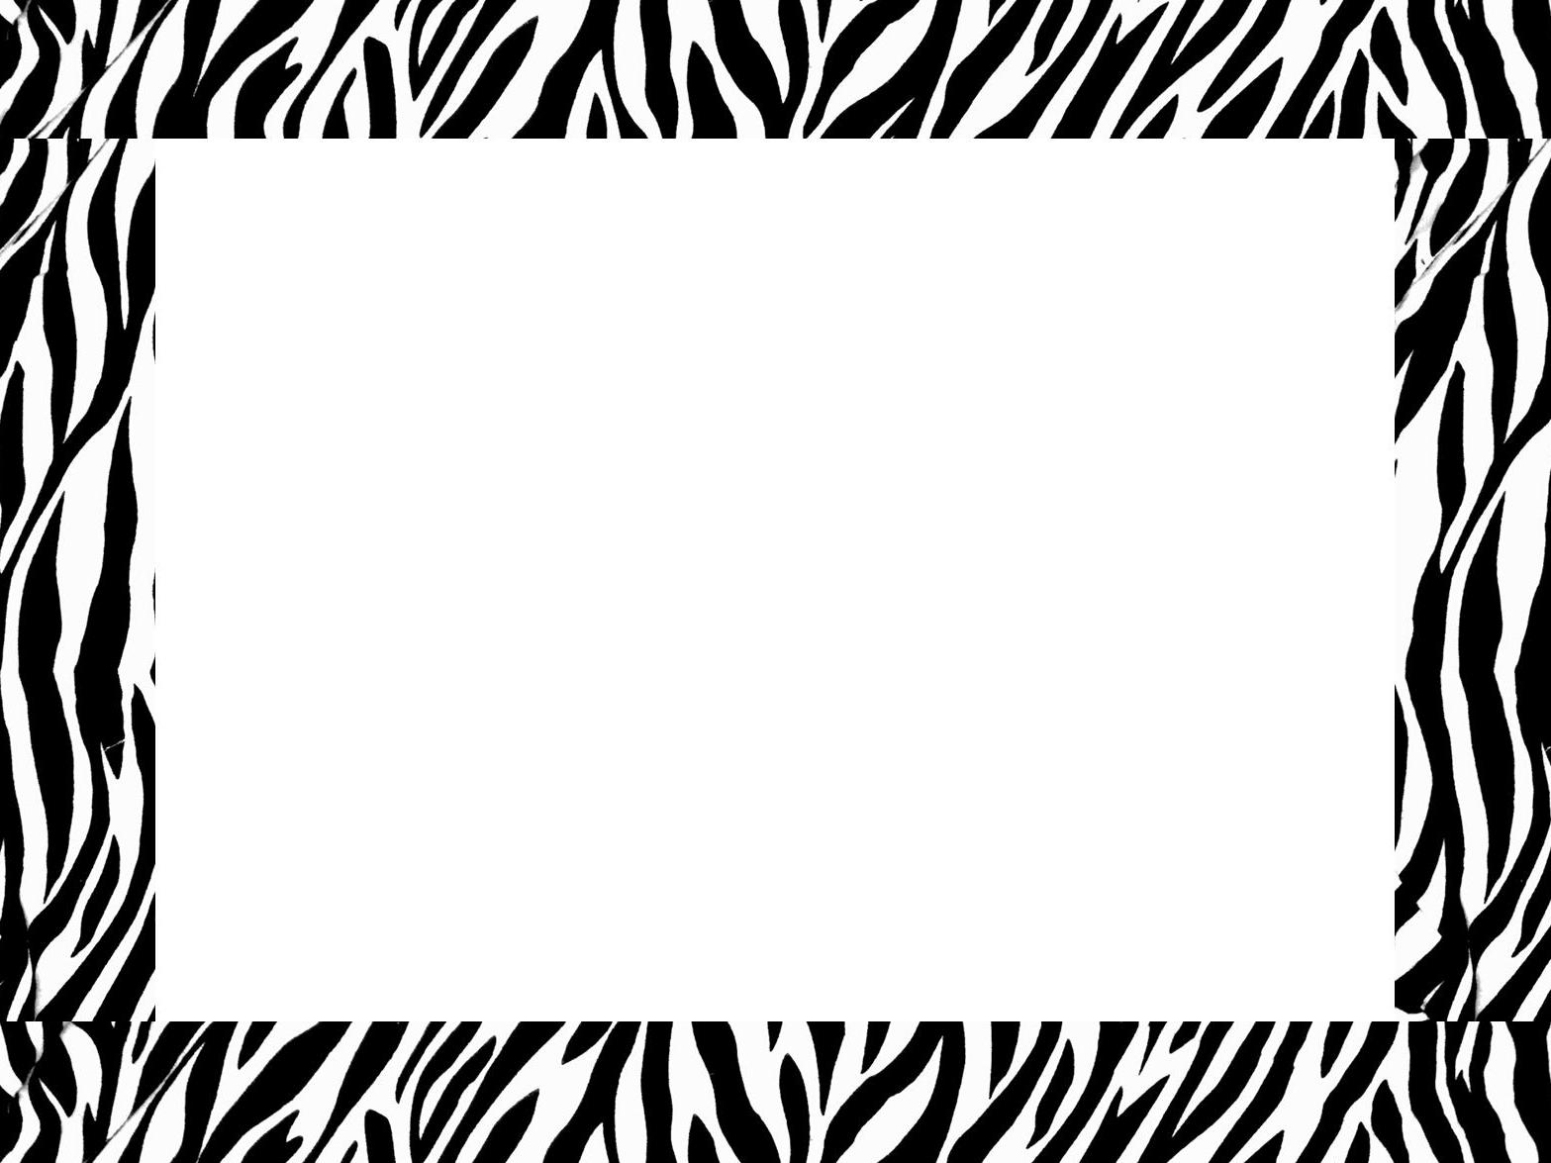 Zebra Label Template For Word | Printable Label Templates For Free Label Border Templates